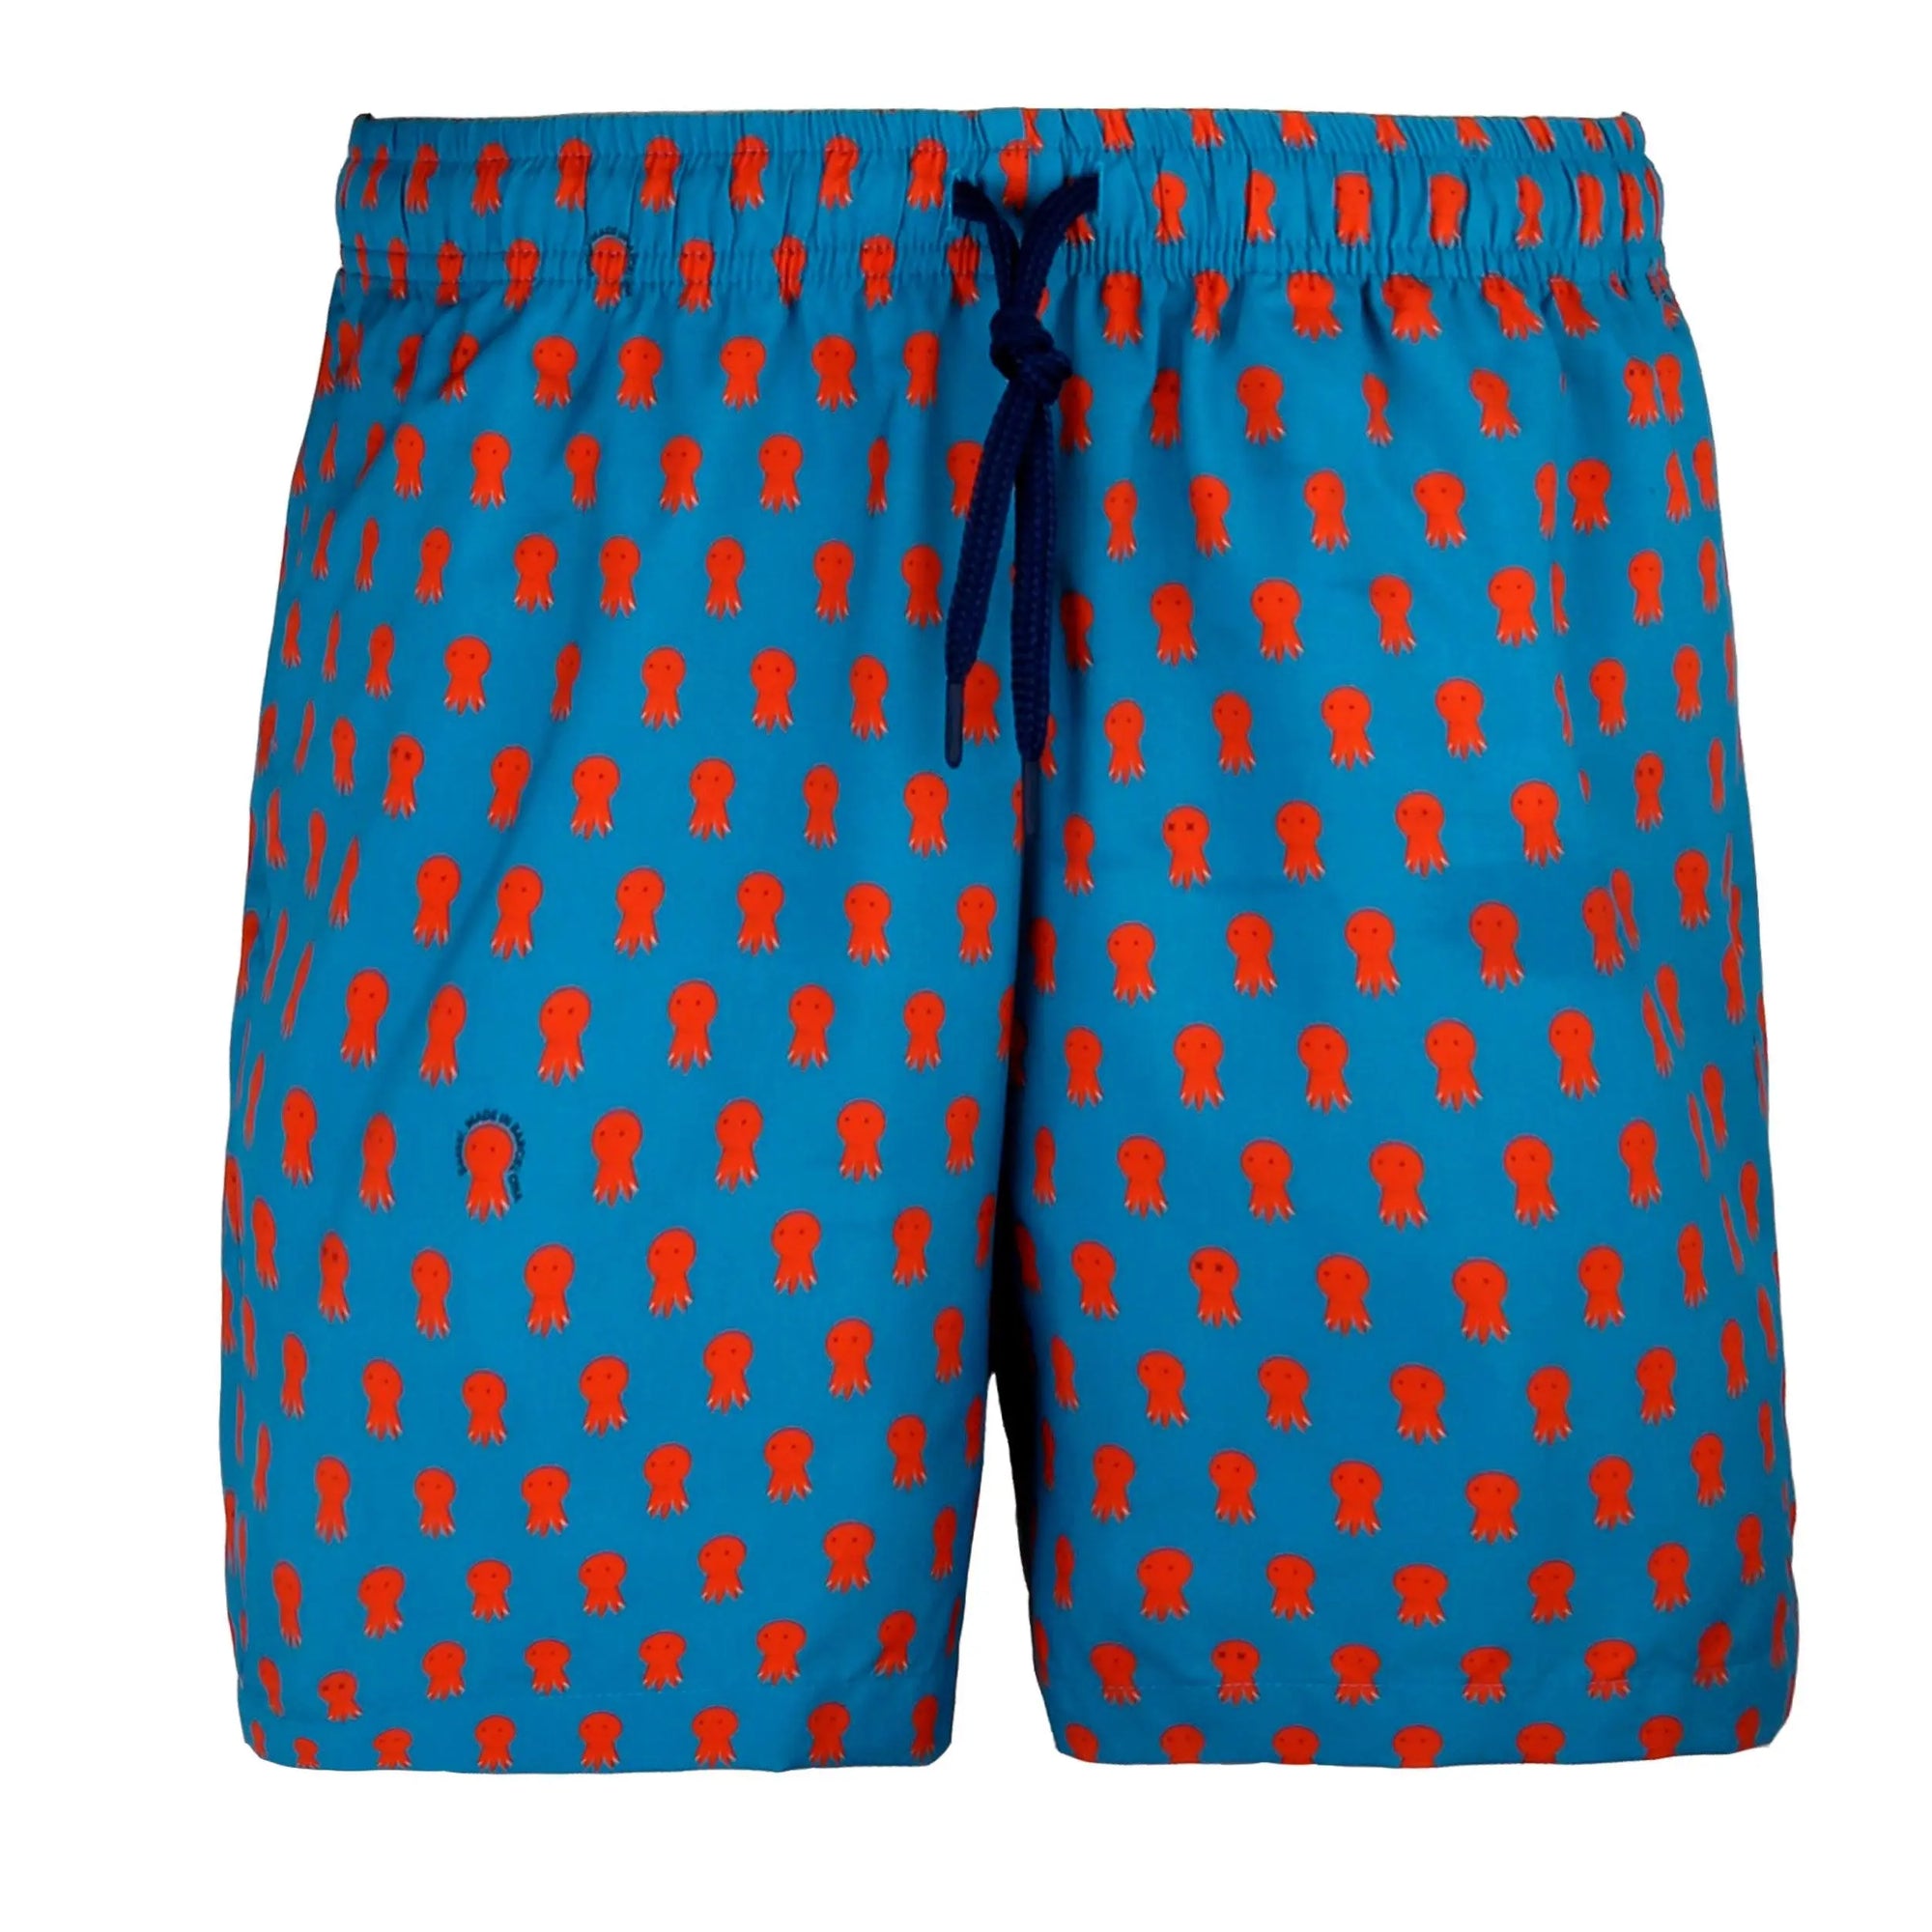 A neatly packed pair of Octo Swimwear with an orange octopus pattern is displayed in an open white box. The waistband is elastic with a blue drawstring. A tag labeled "Bassal" is attached to the swimwear, which are folded and arranged tidily inside the box.
